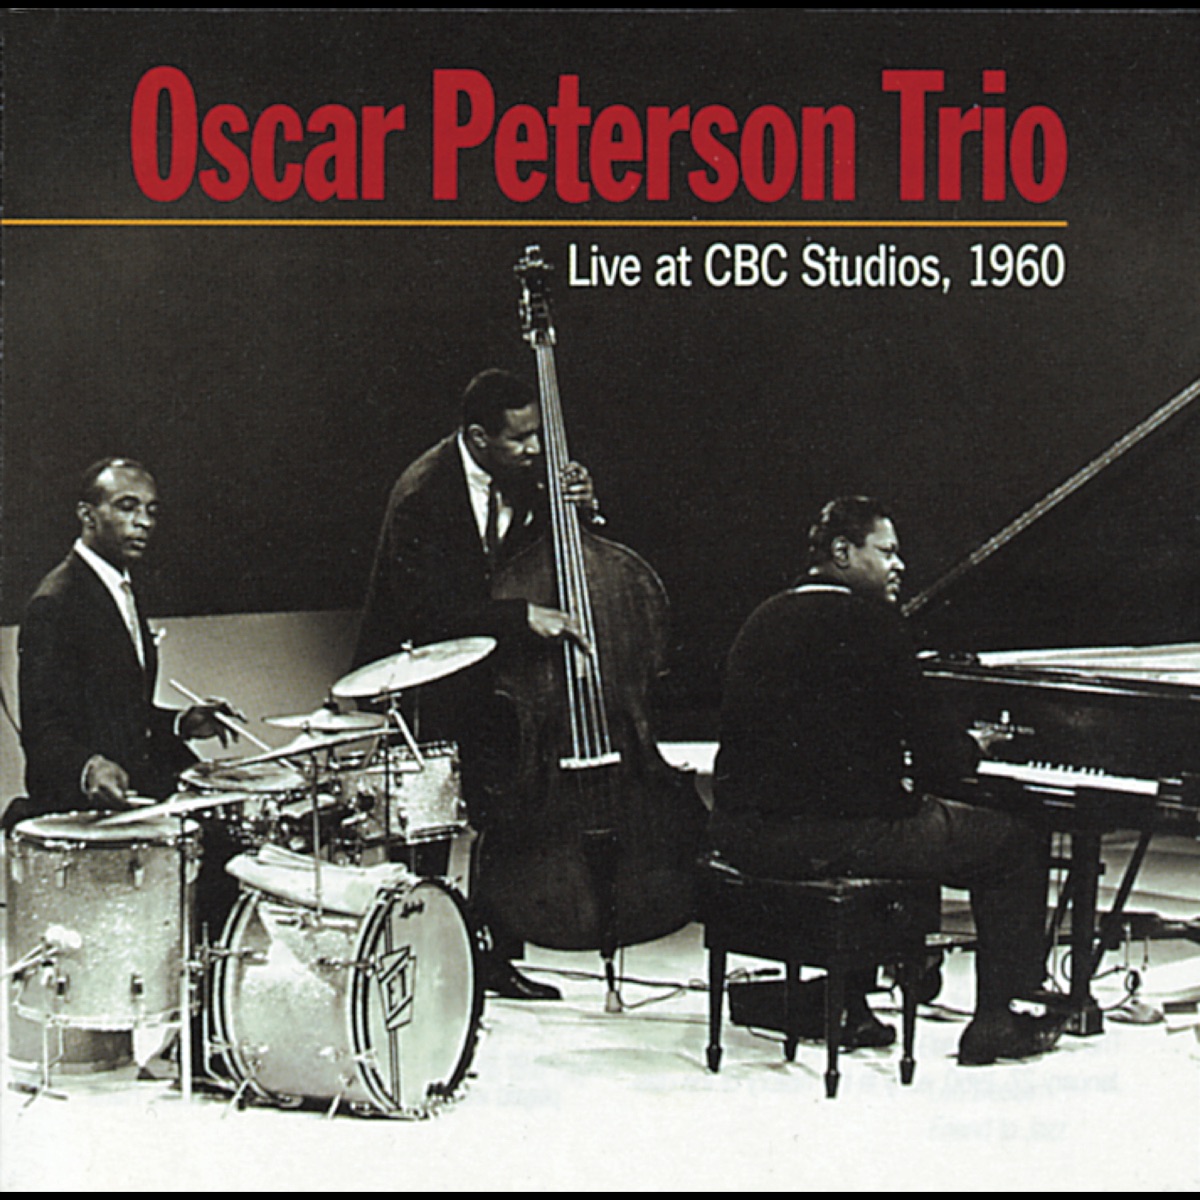 We Get Requests - Album by Oscar Peterson Trio - Apple Music